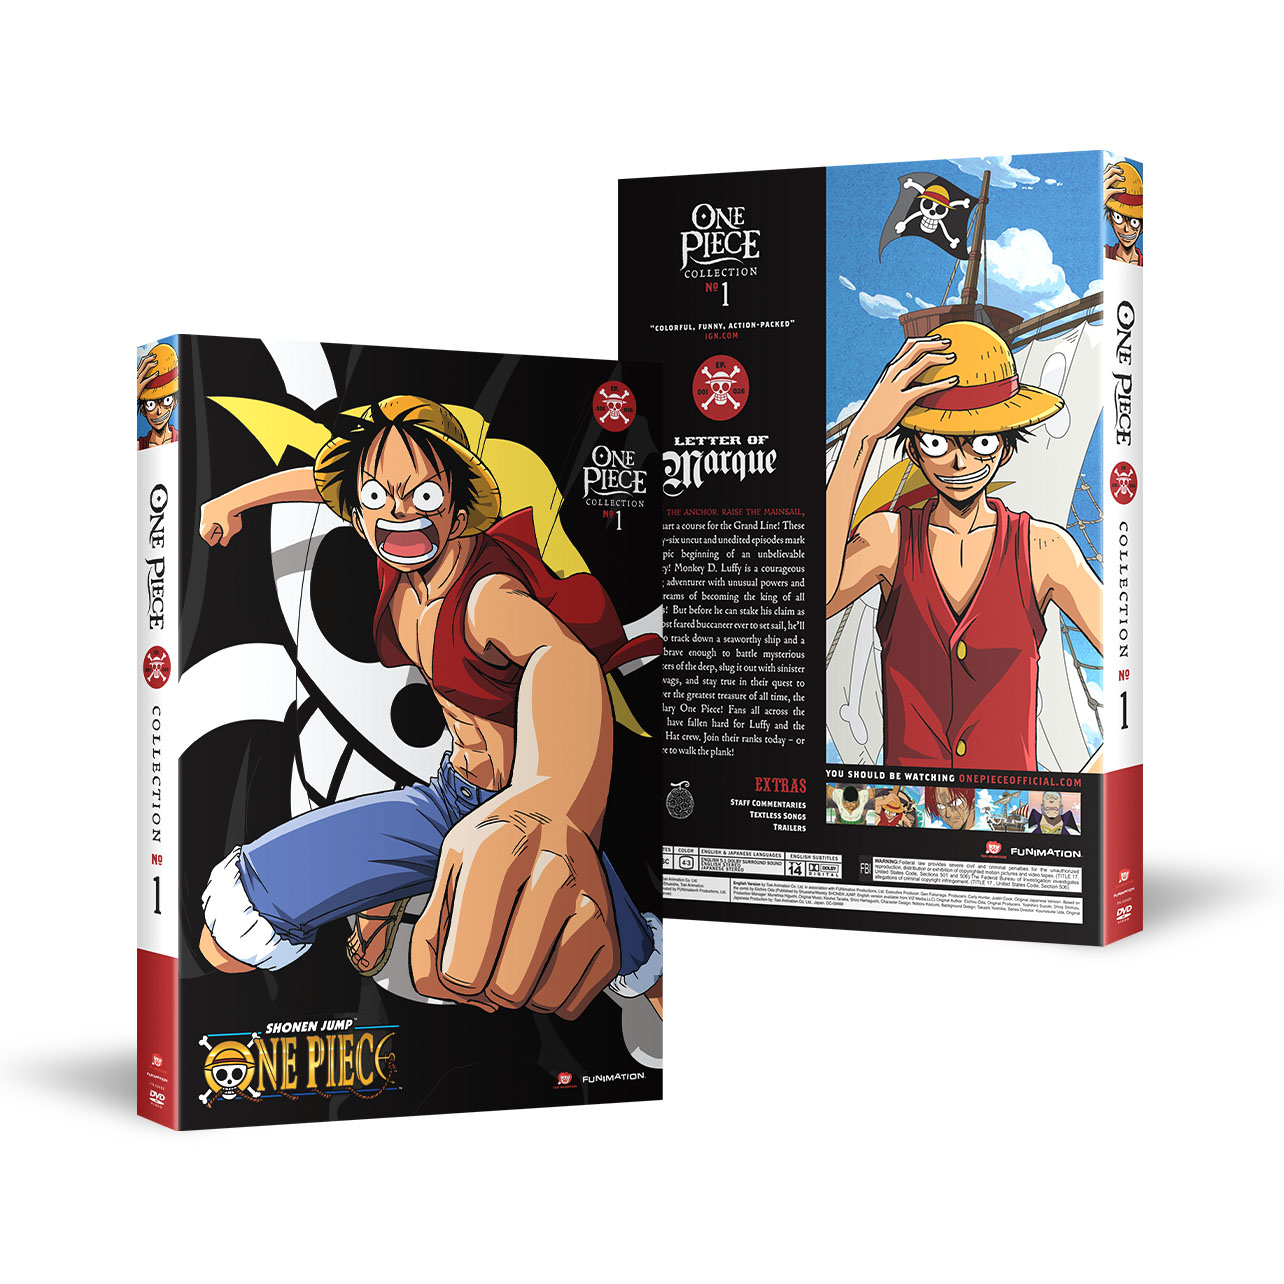 One Piece - Collection 1 - DVD image count 0